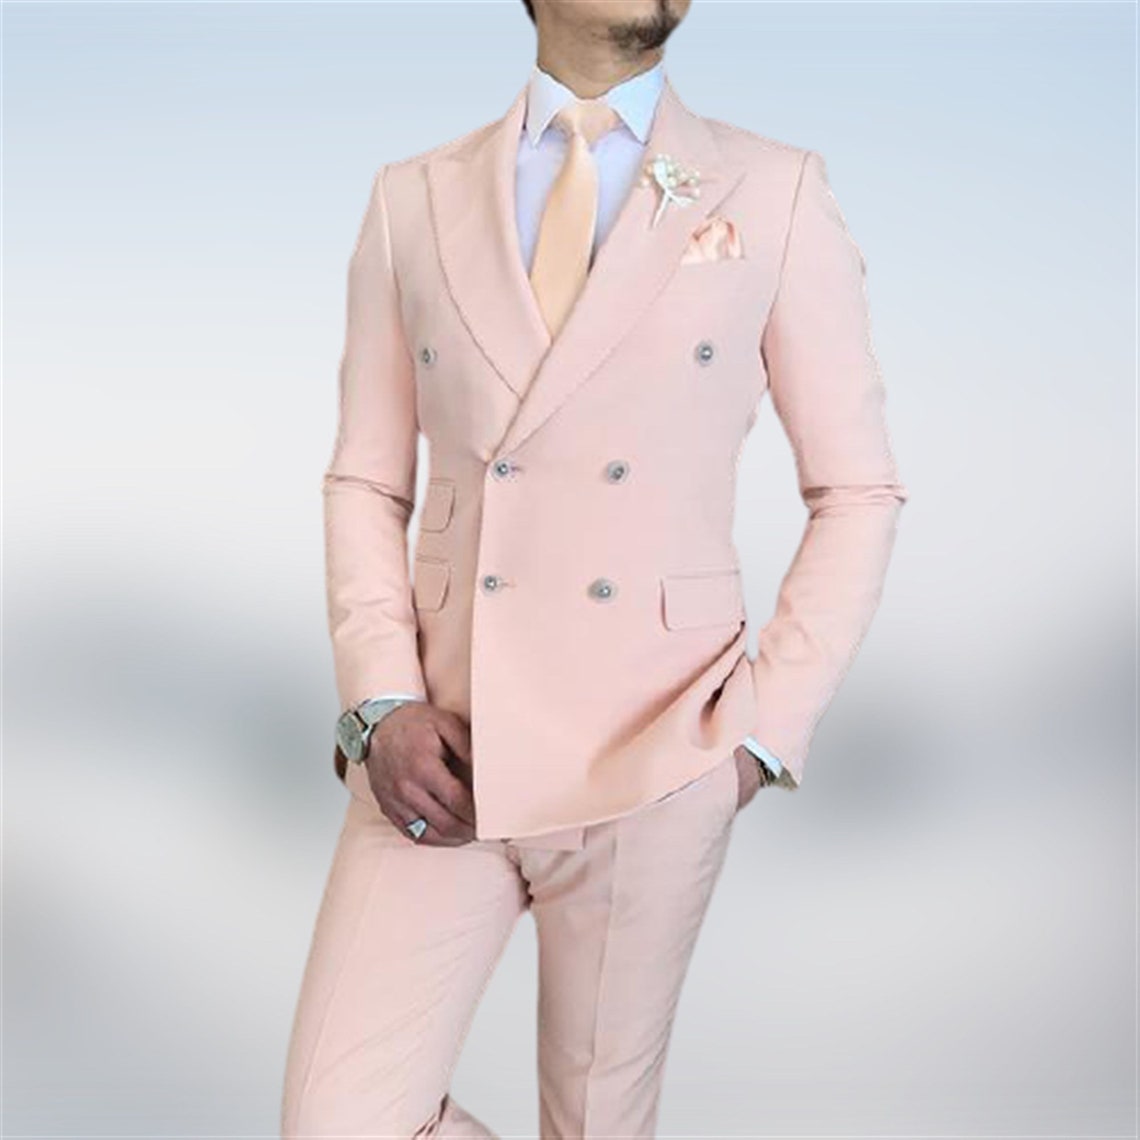 Men Suits Pink Luxury Fashion Designer Double Breasted Suit - Etsy